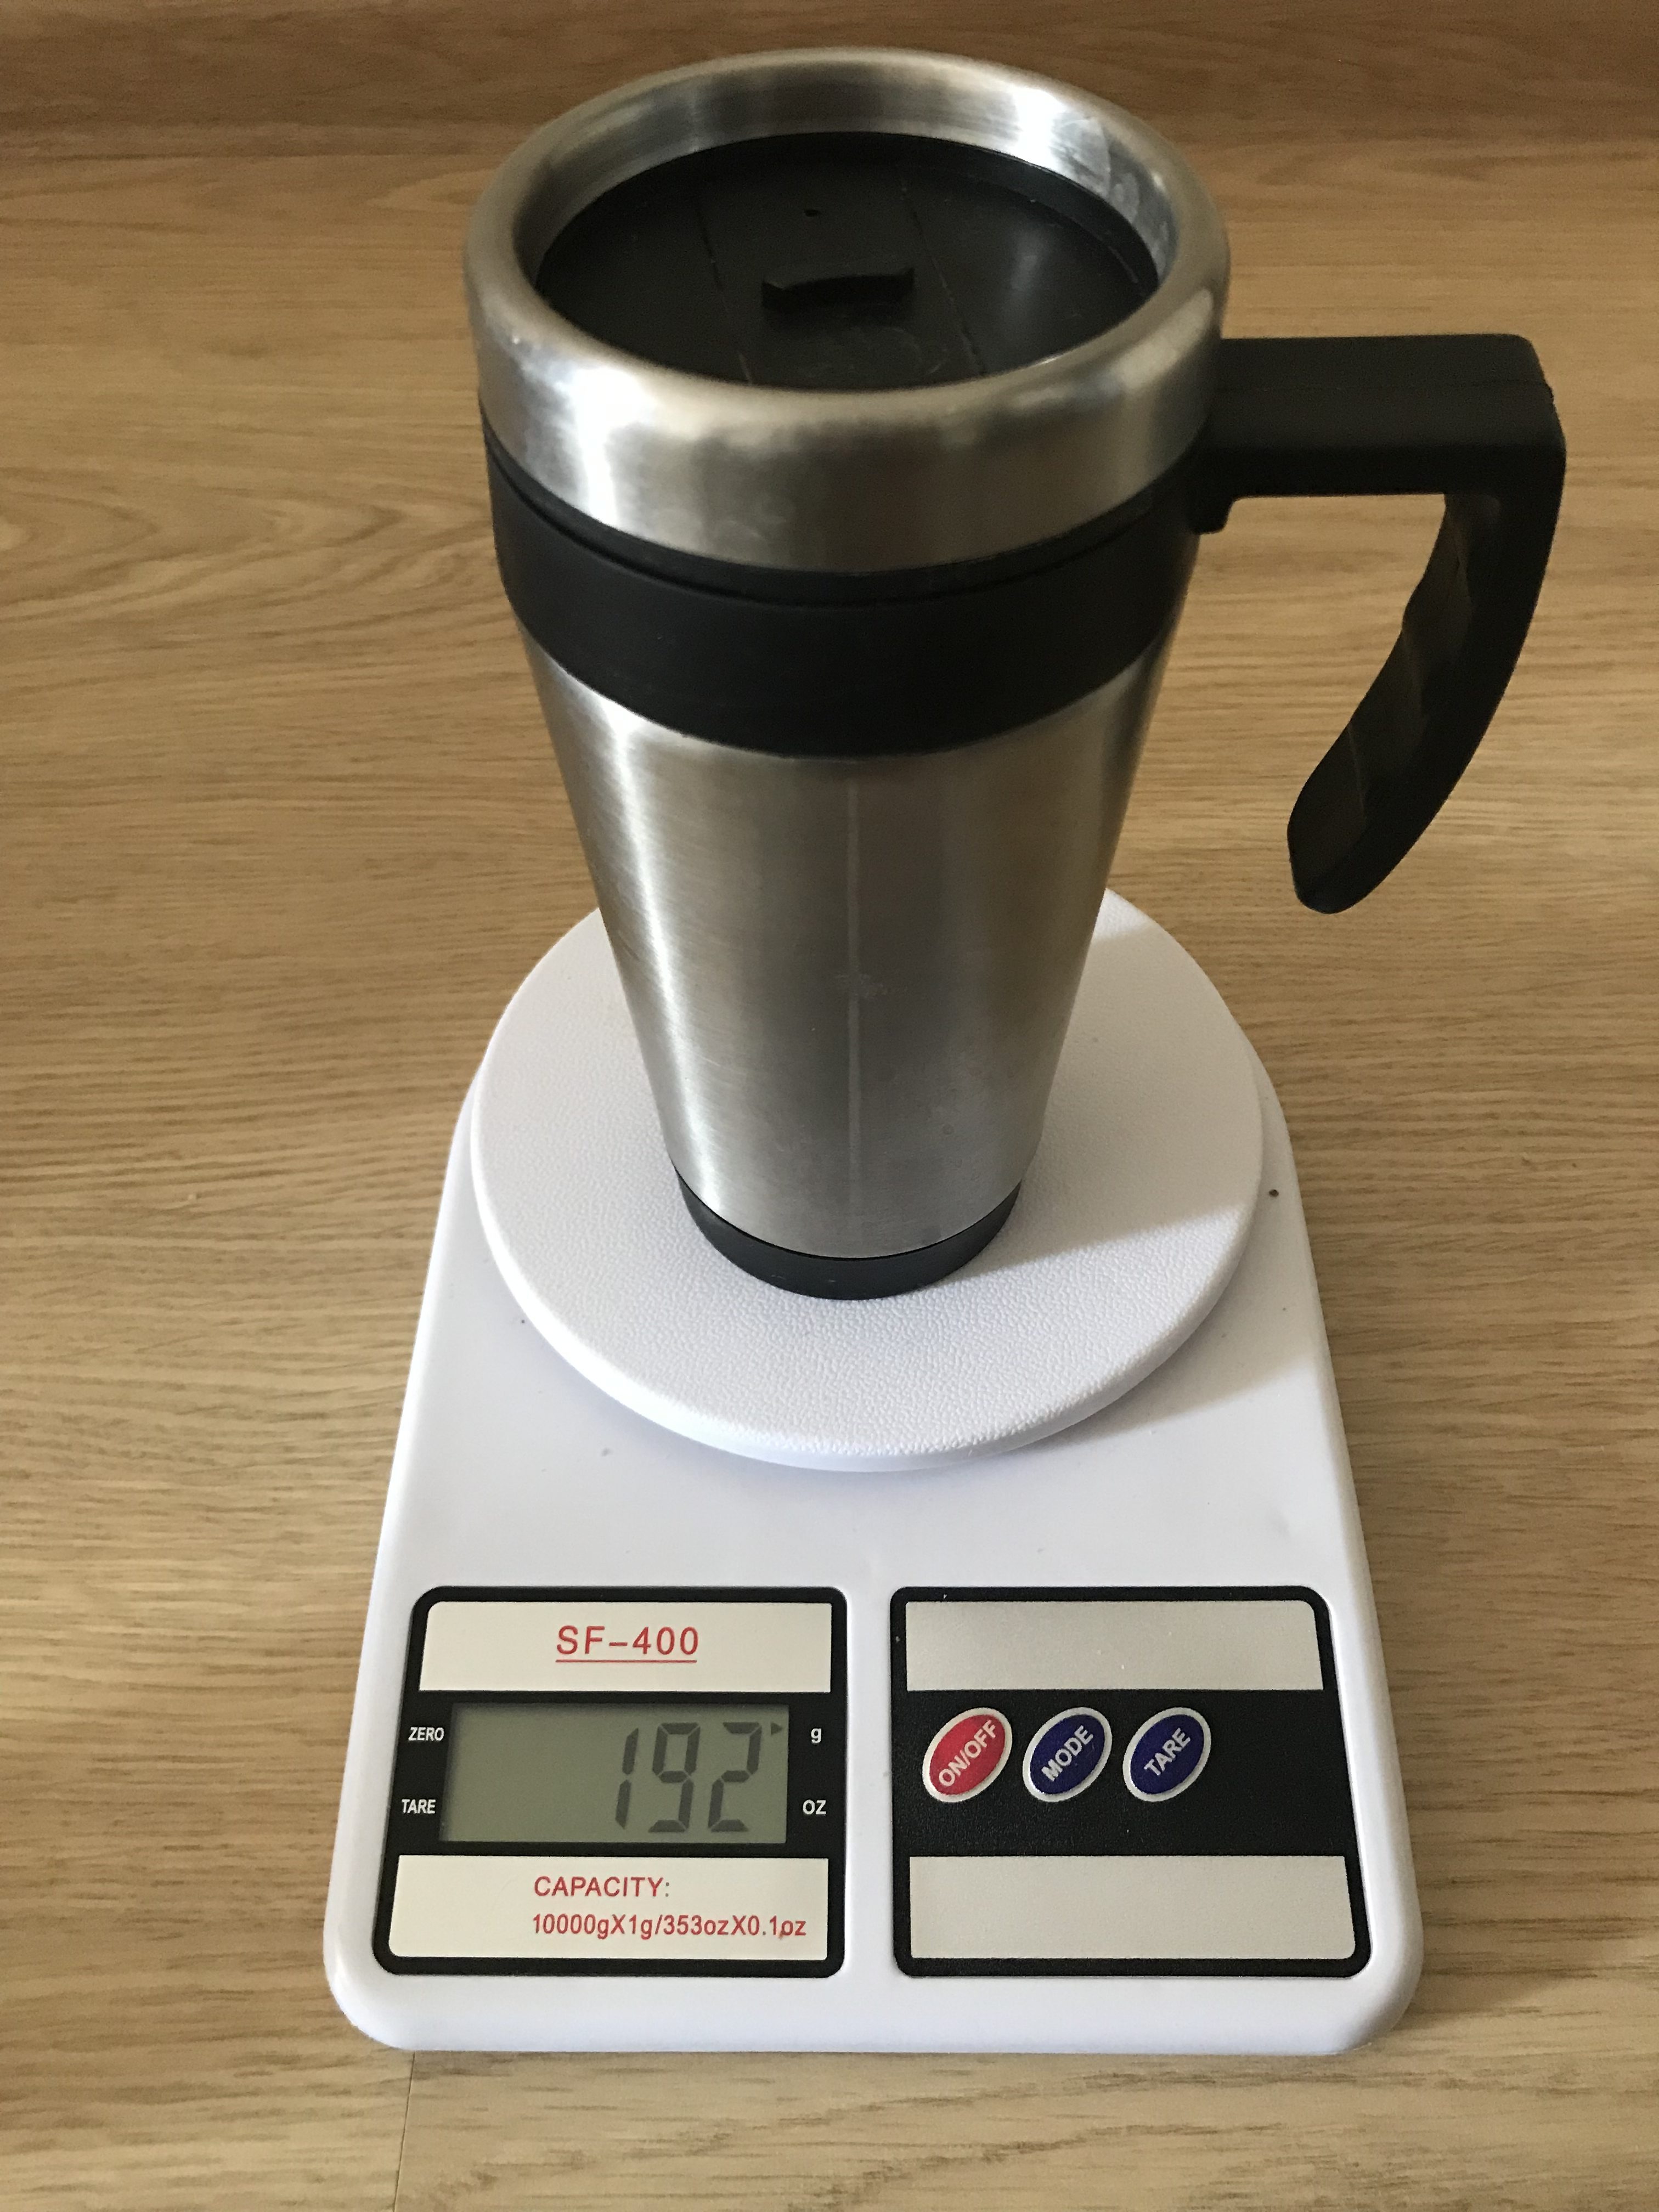 How much does a thermal mug weigh?